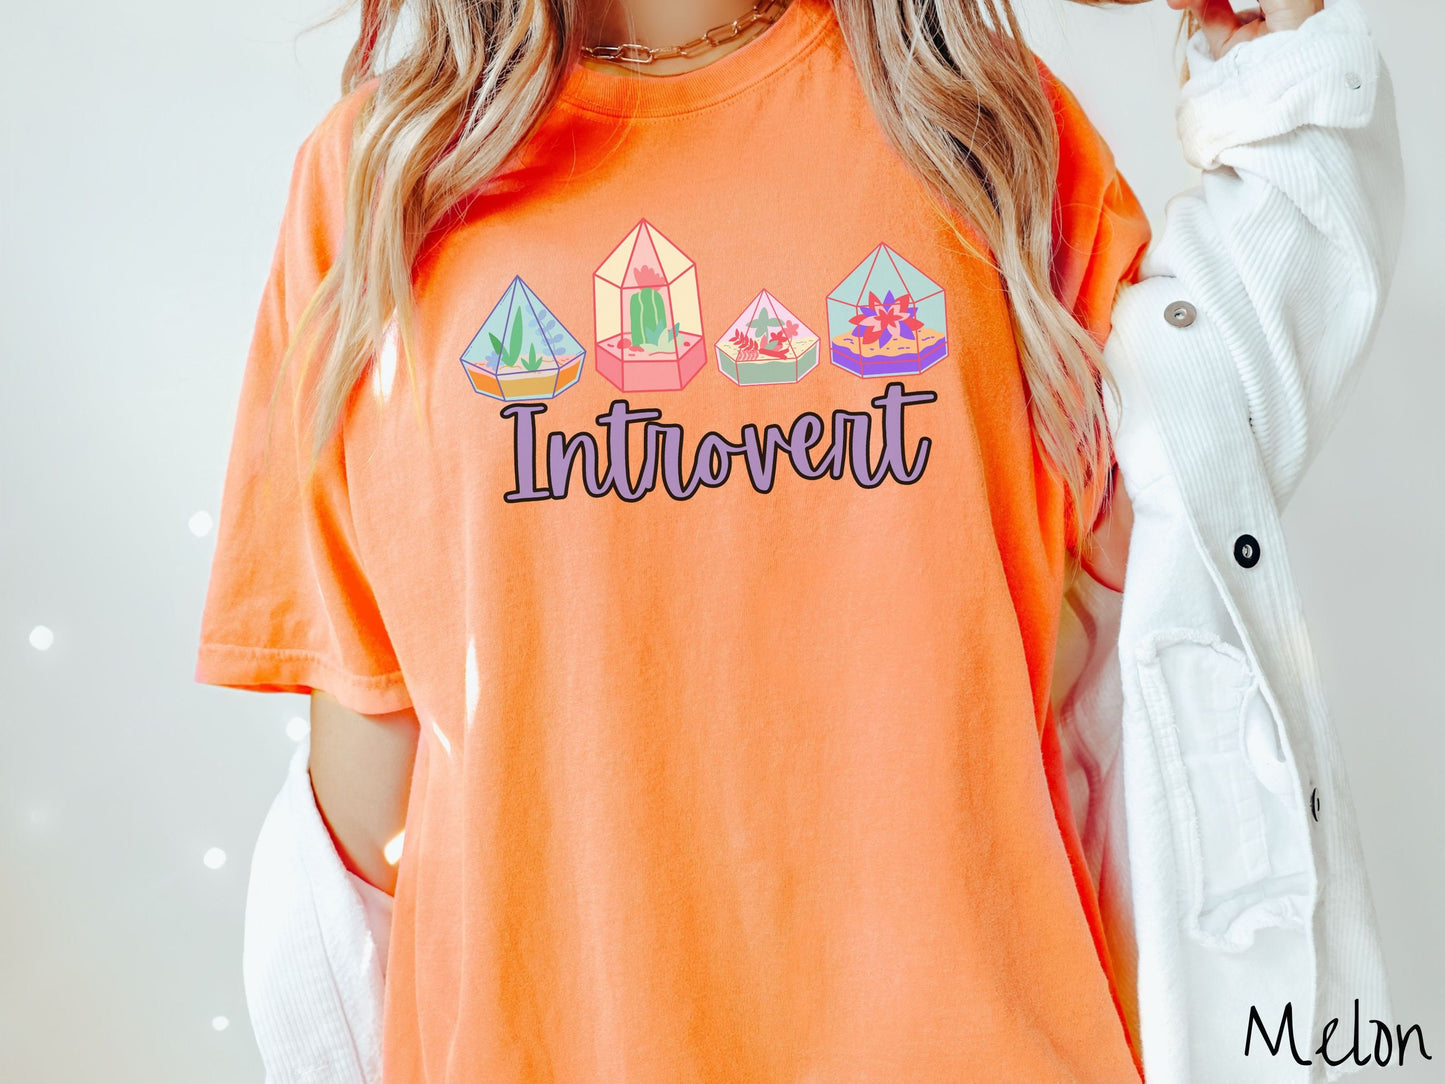 A woman wearing a cute, vintage melon colored Comfort Colors t-shirt with the text Introvert in purple font across the front. Above the text are four colorful plant terrariums with colorful flowers and cacti inside.